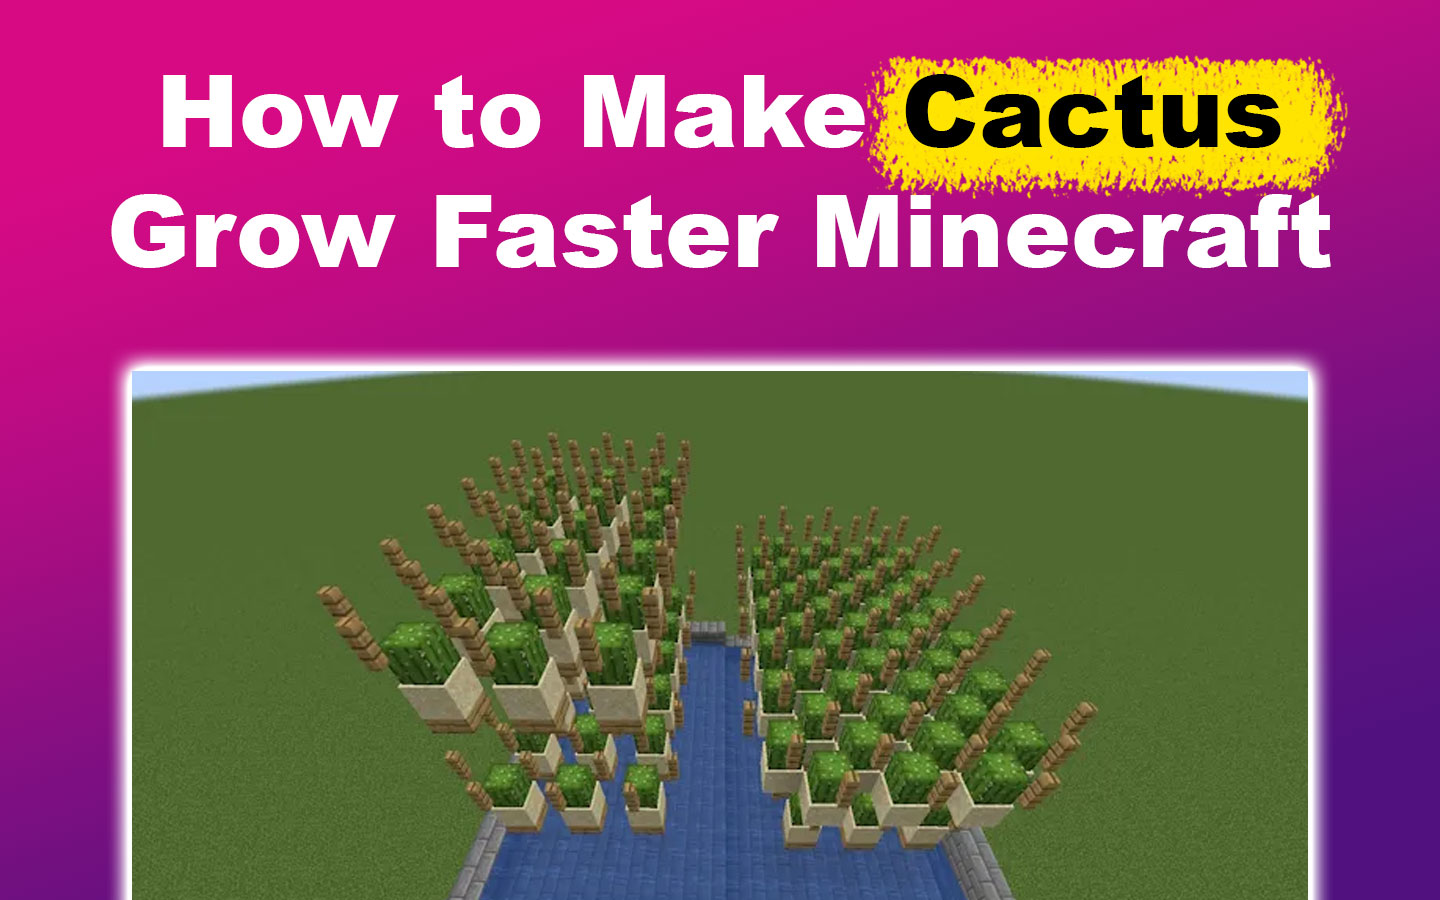 How to Make Cactus Grow Faster Minecraft